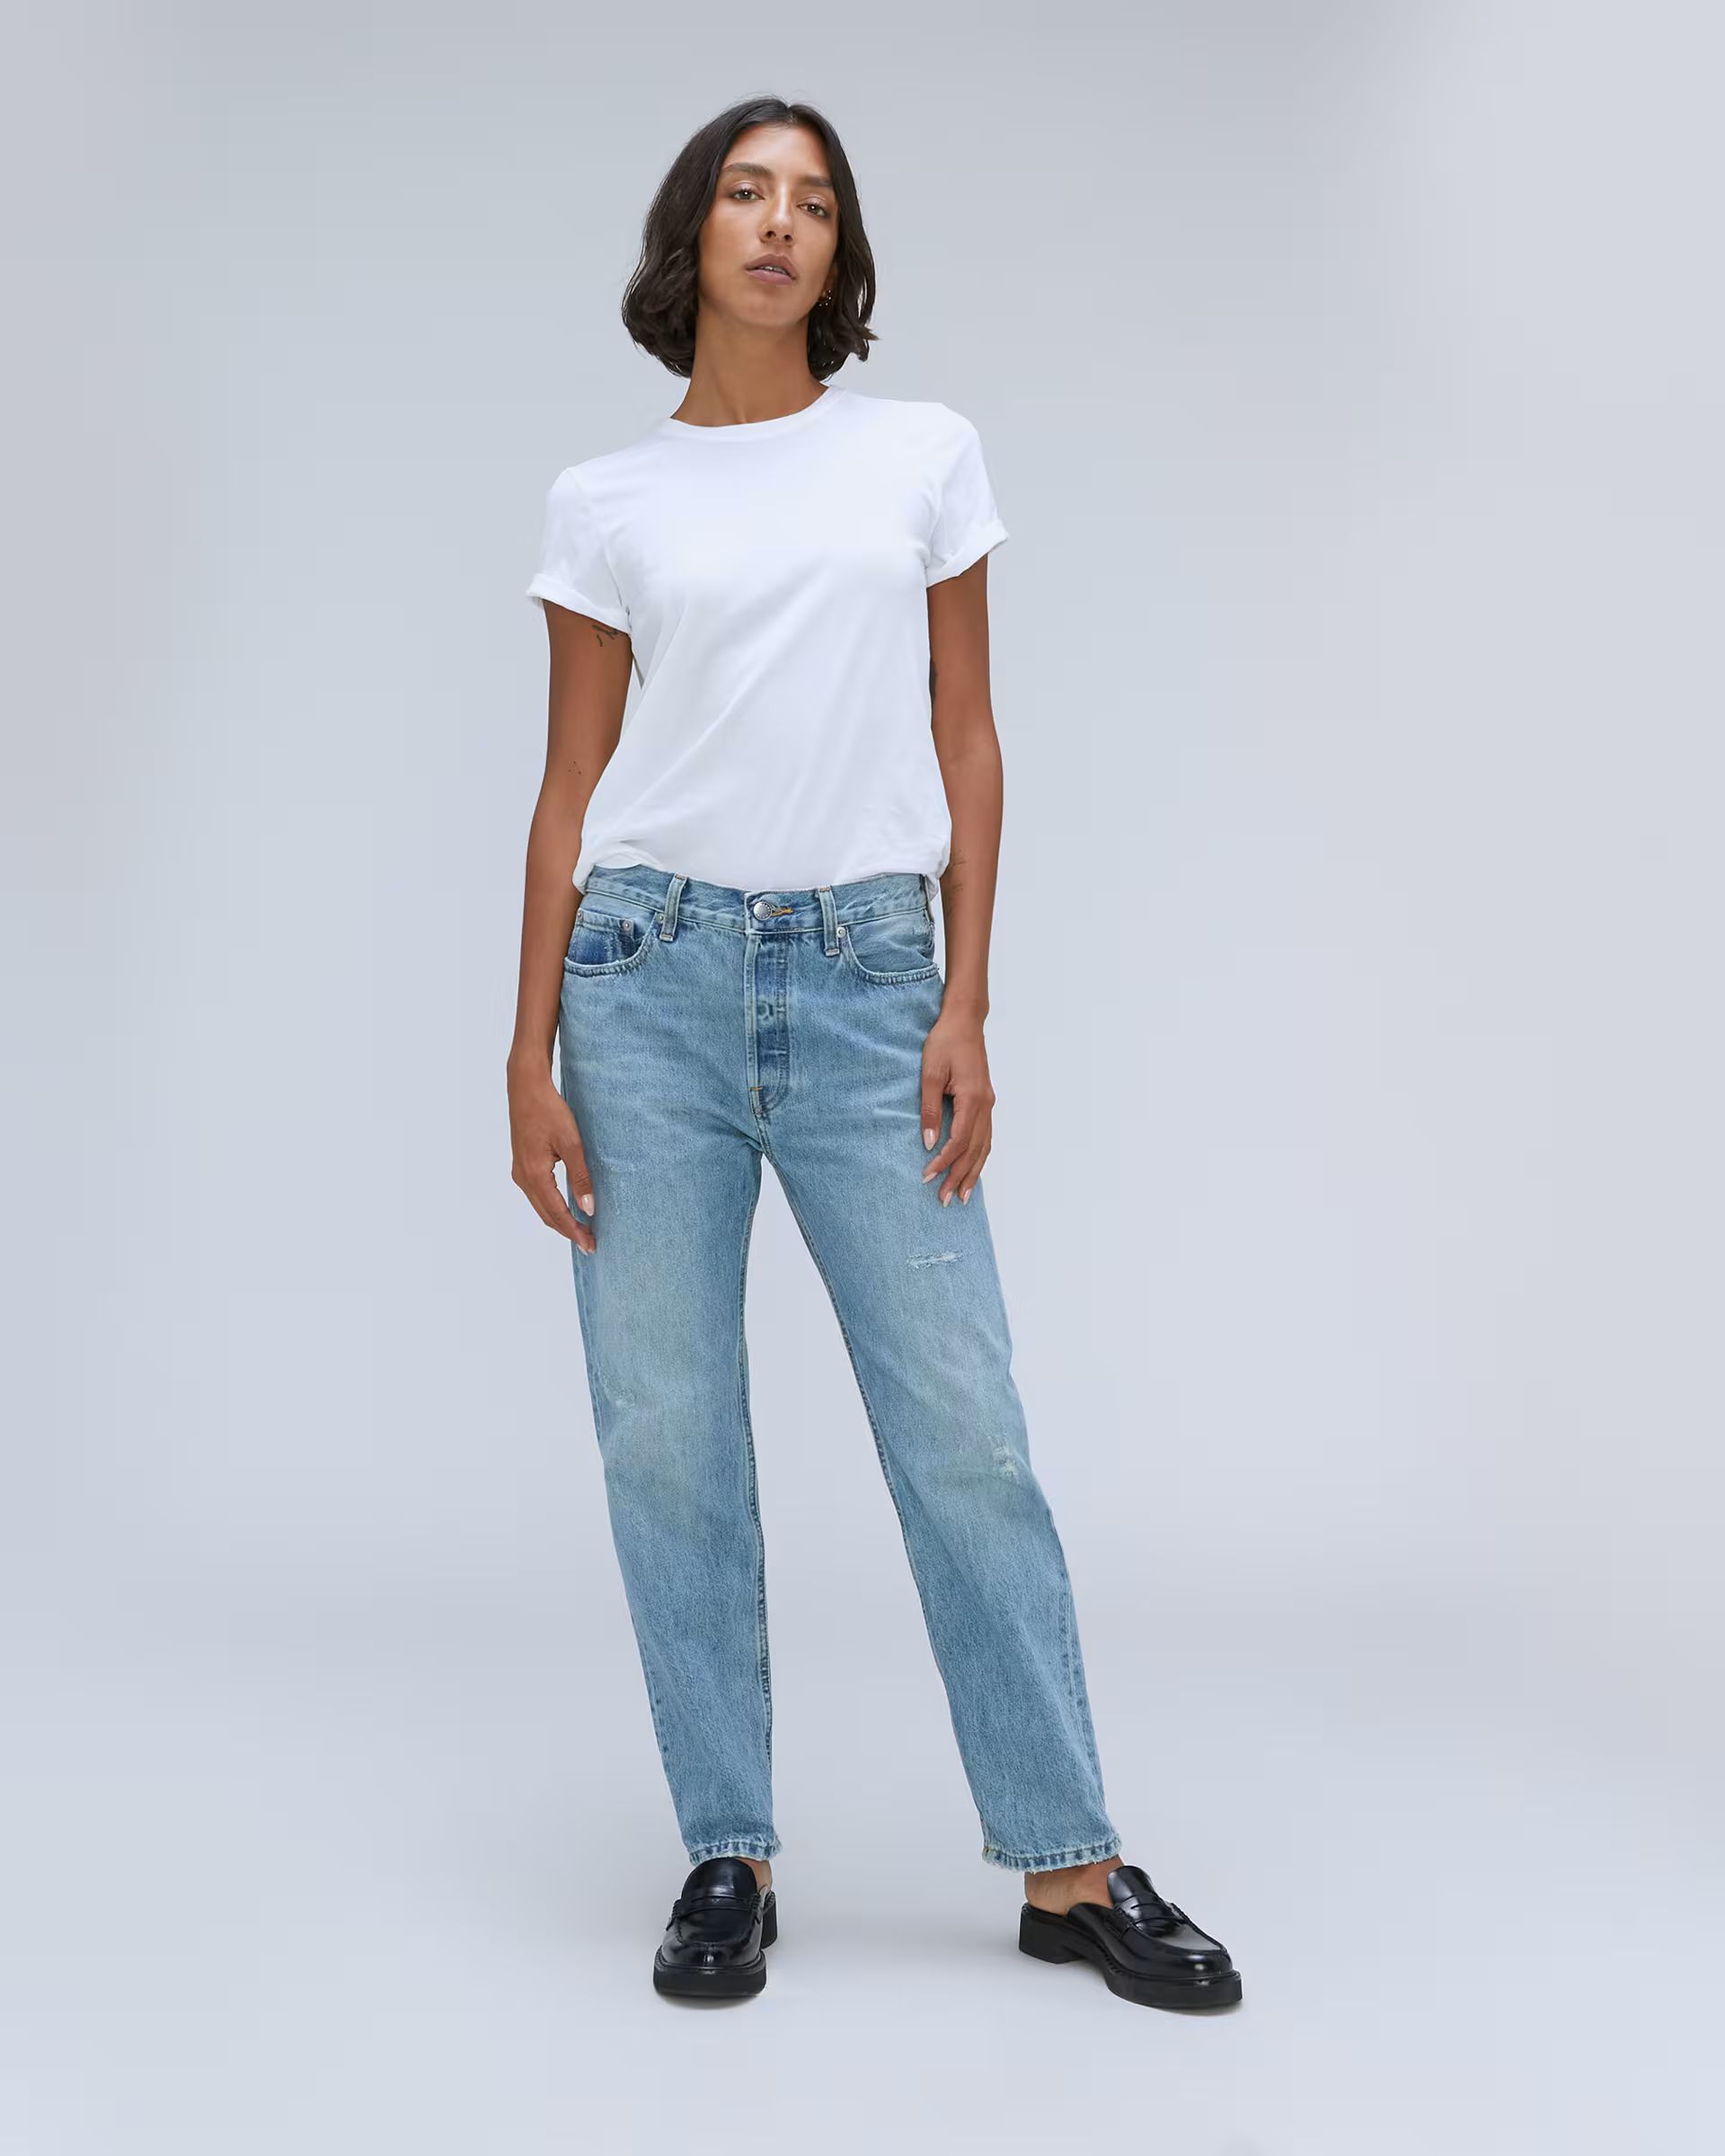 The Rigid Slouch Jean | Everlane